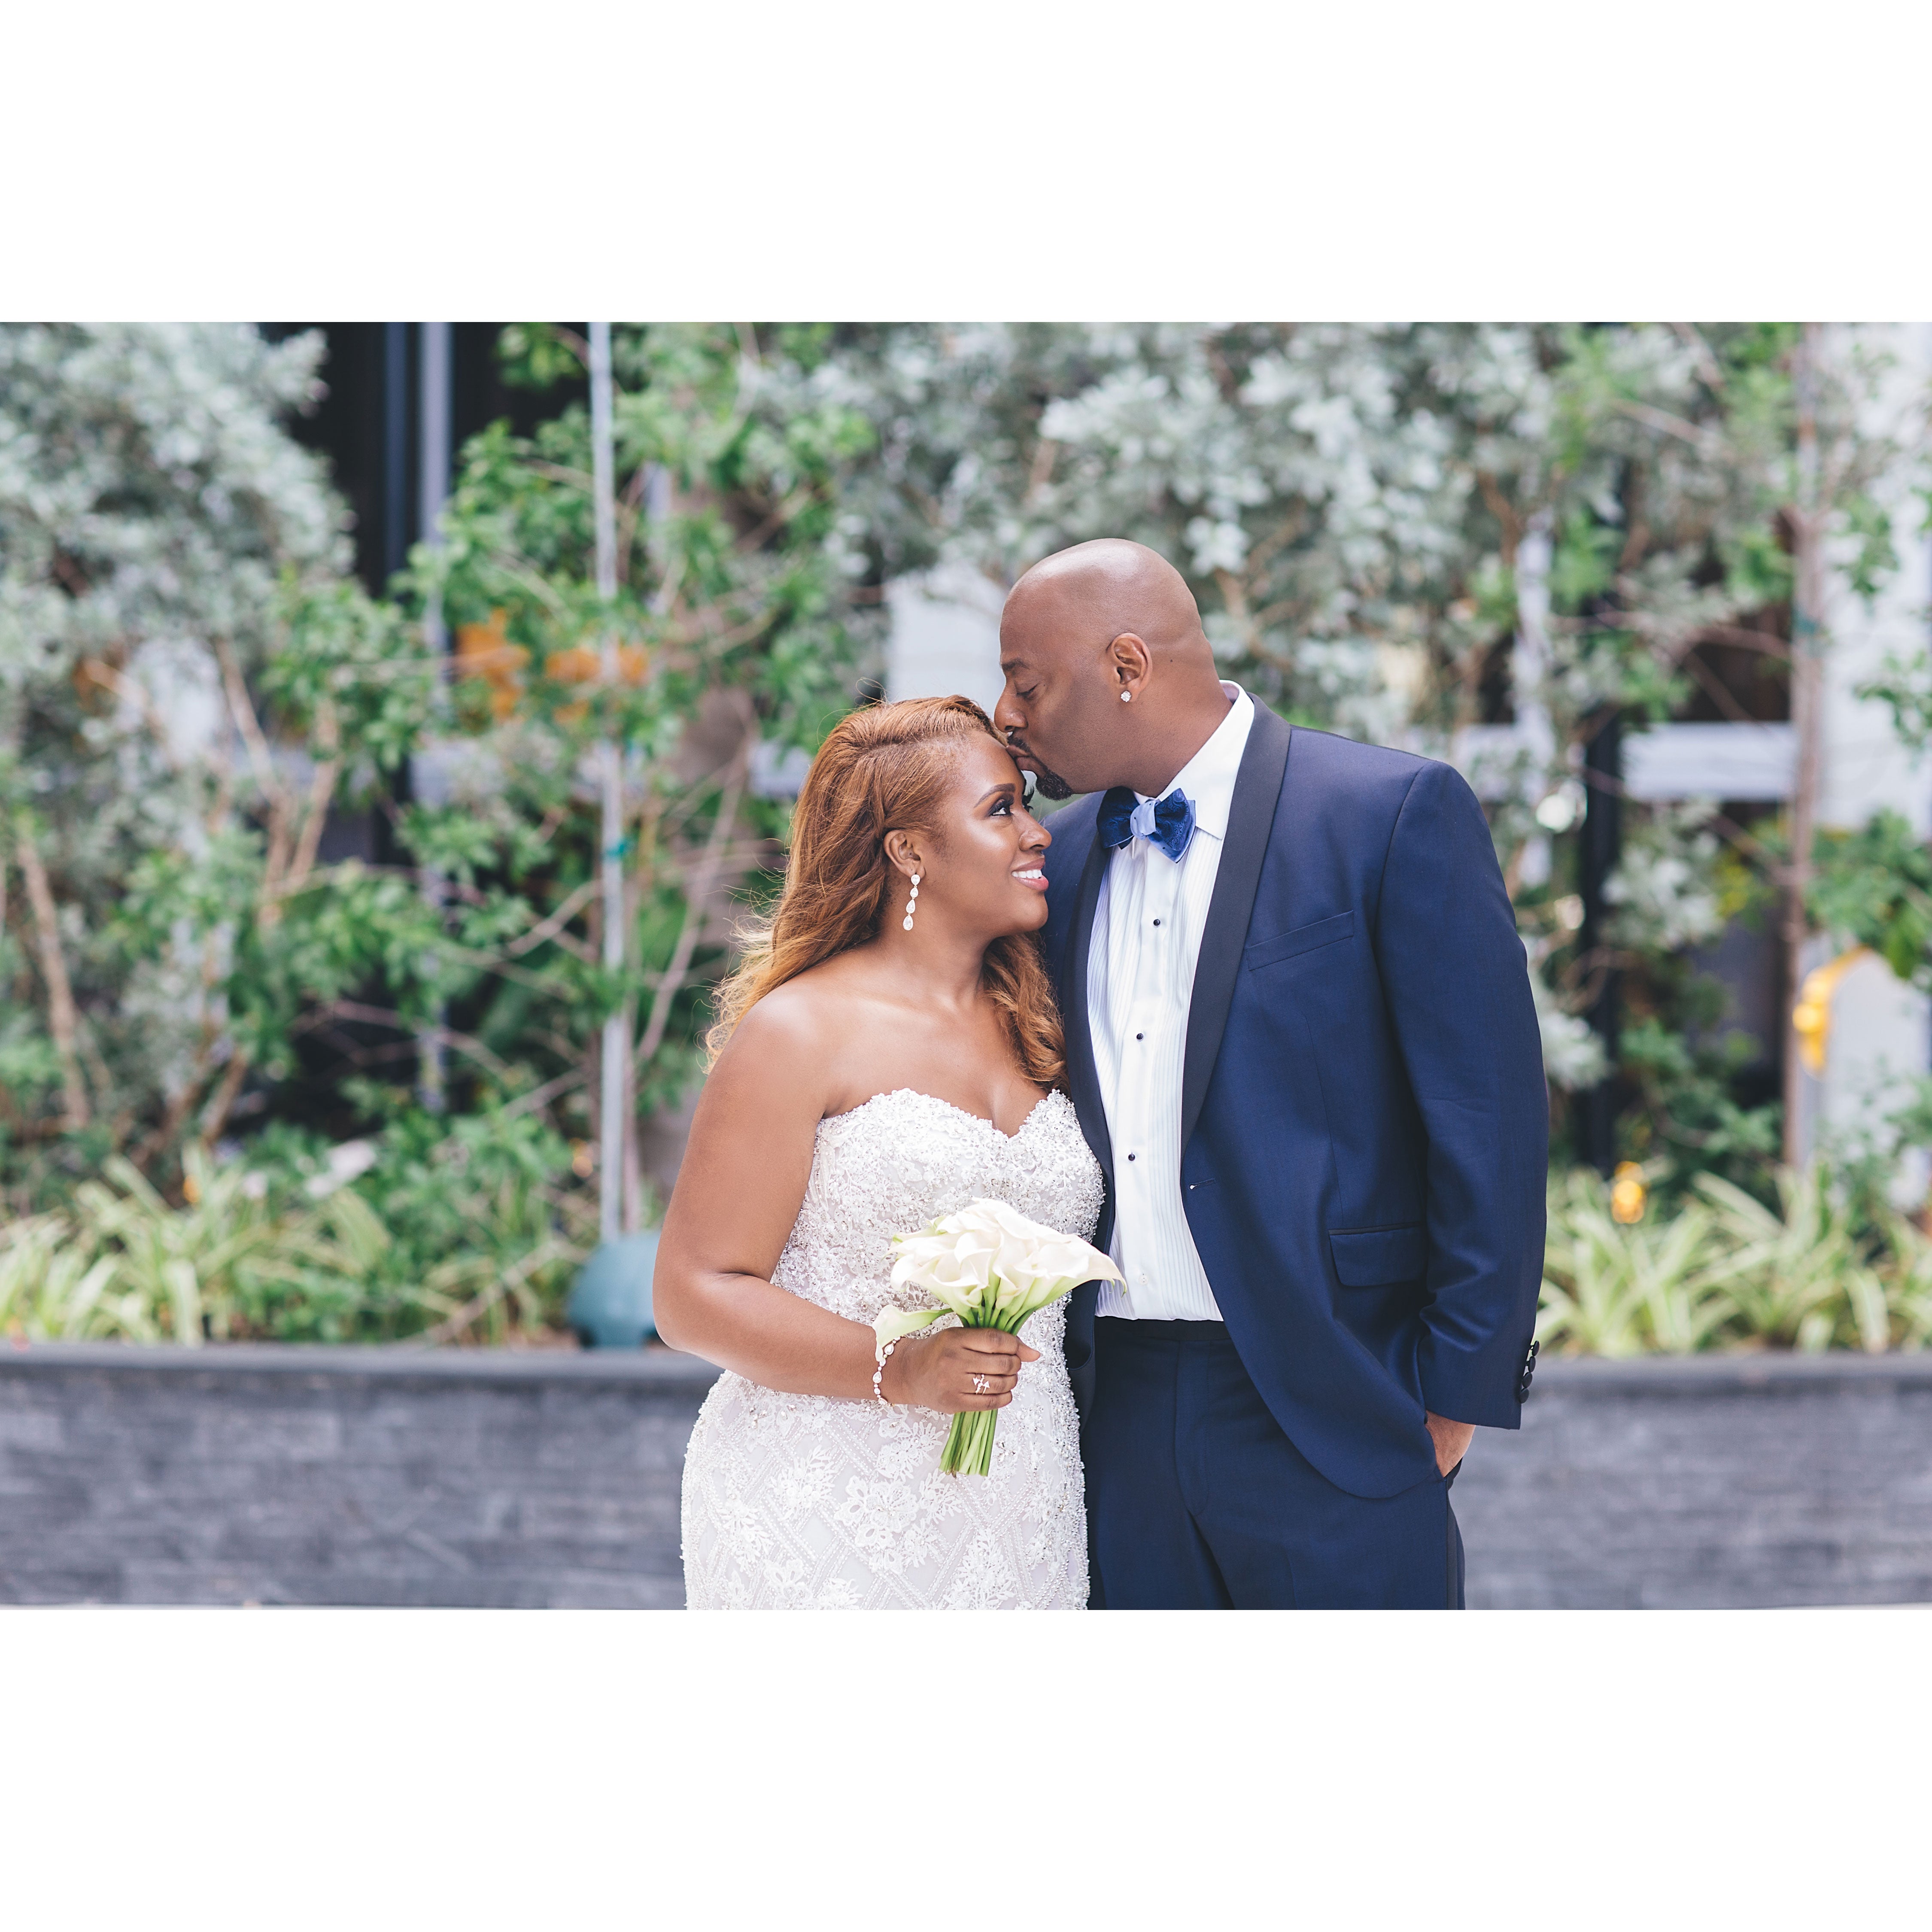 Bridal Bliss: April and Erick's Modern Love Story Began In a Convenience Store
